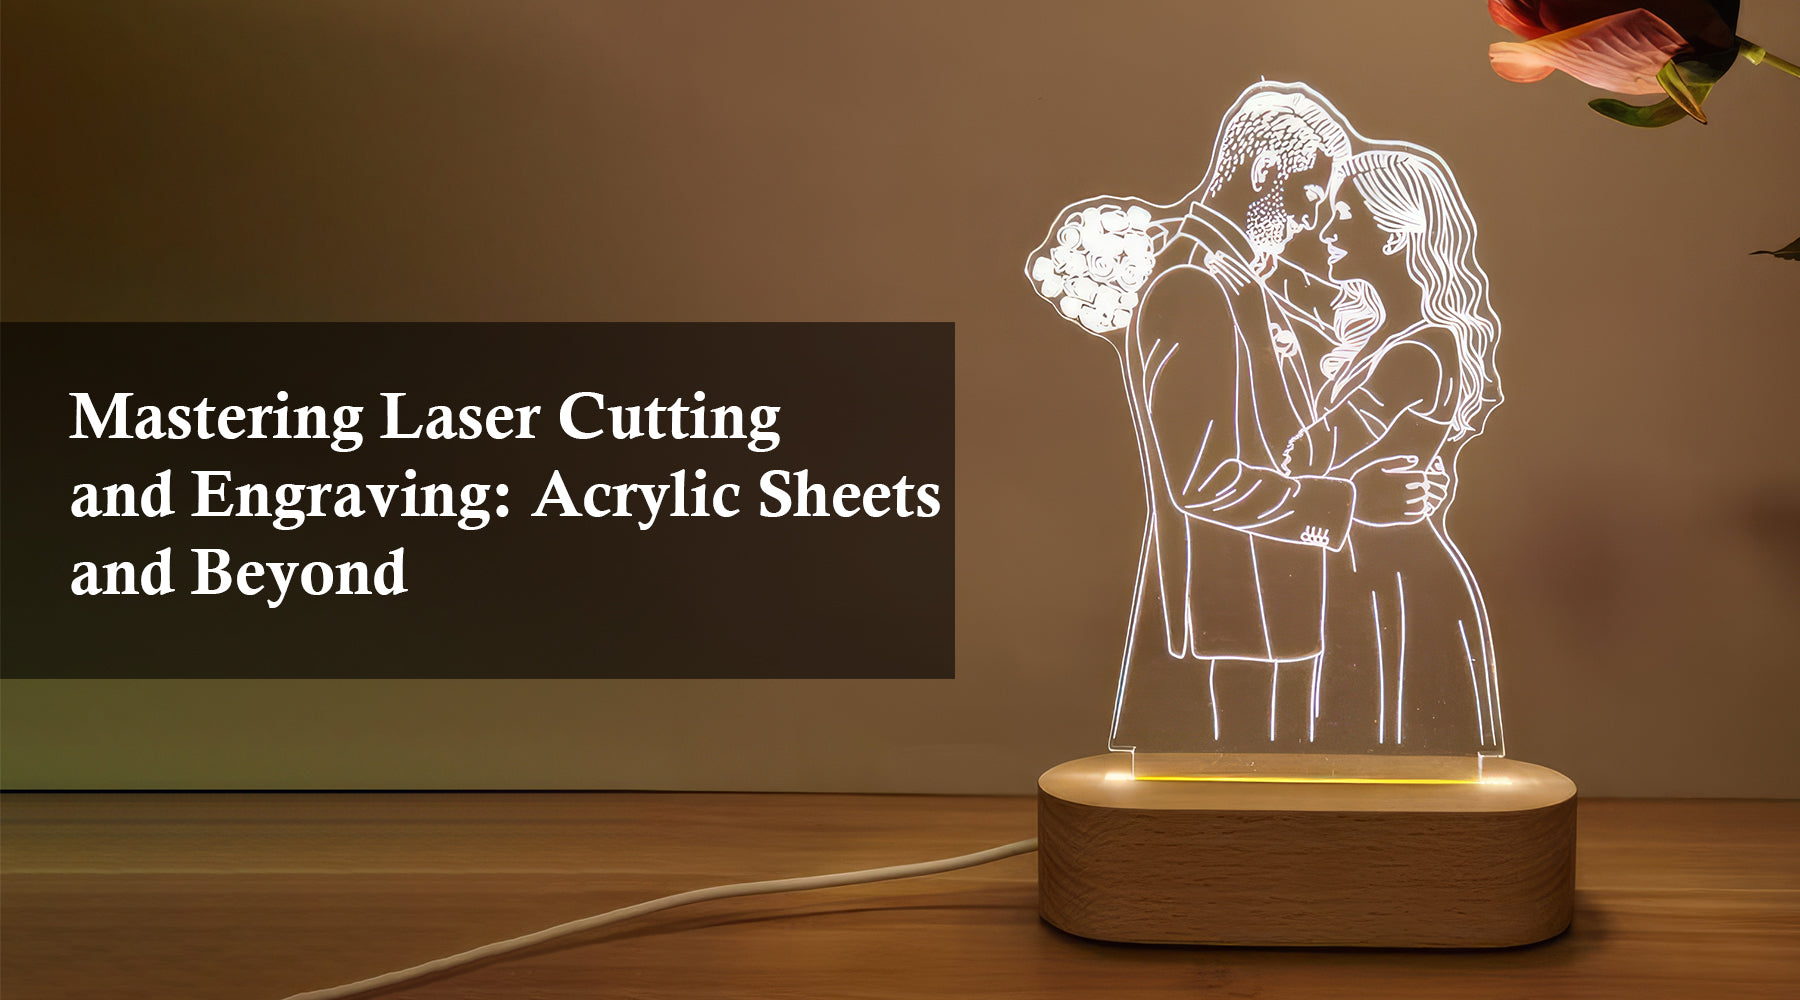 Mastering Laser Cutting and Engraving: Acrylic Sheets and Beyond